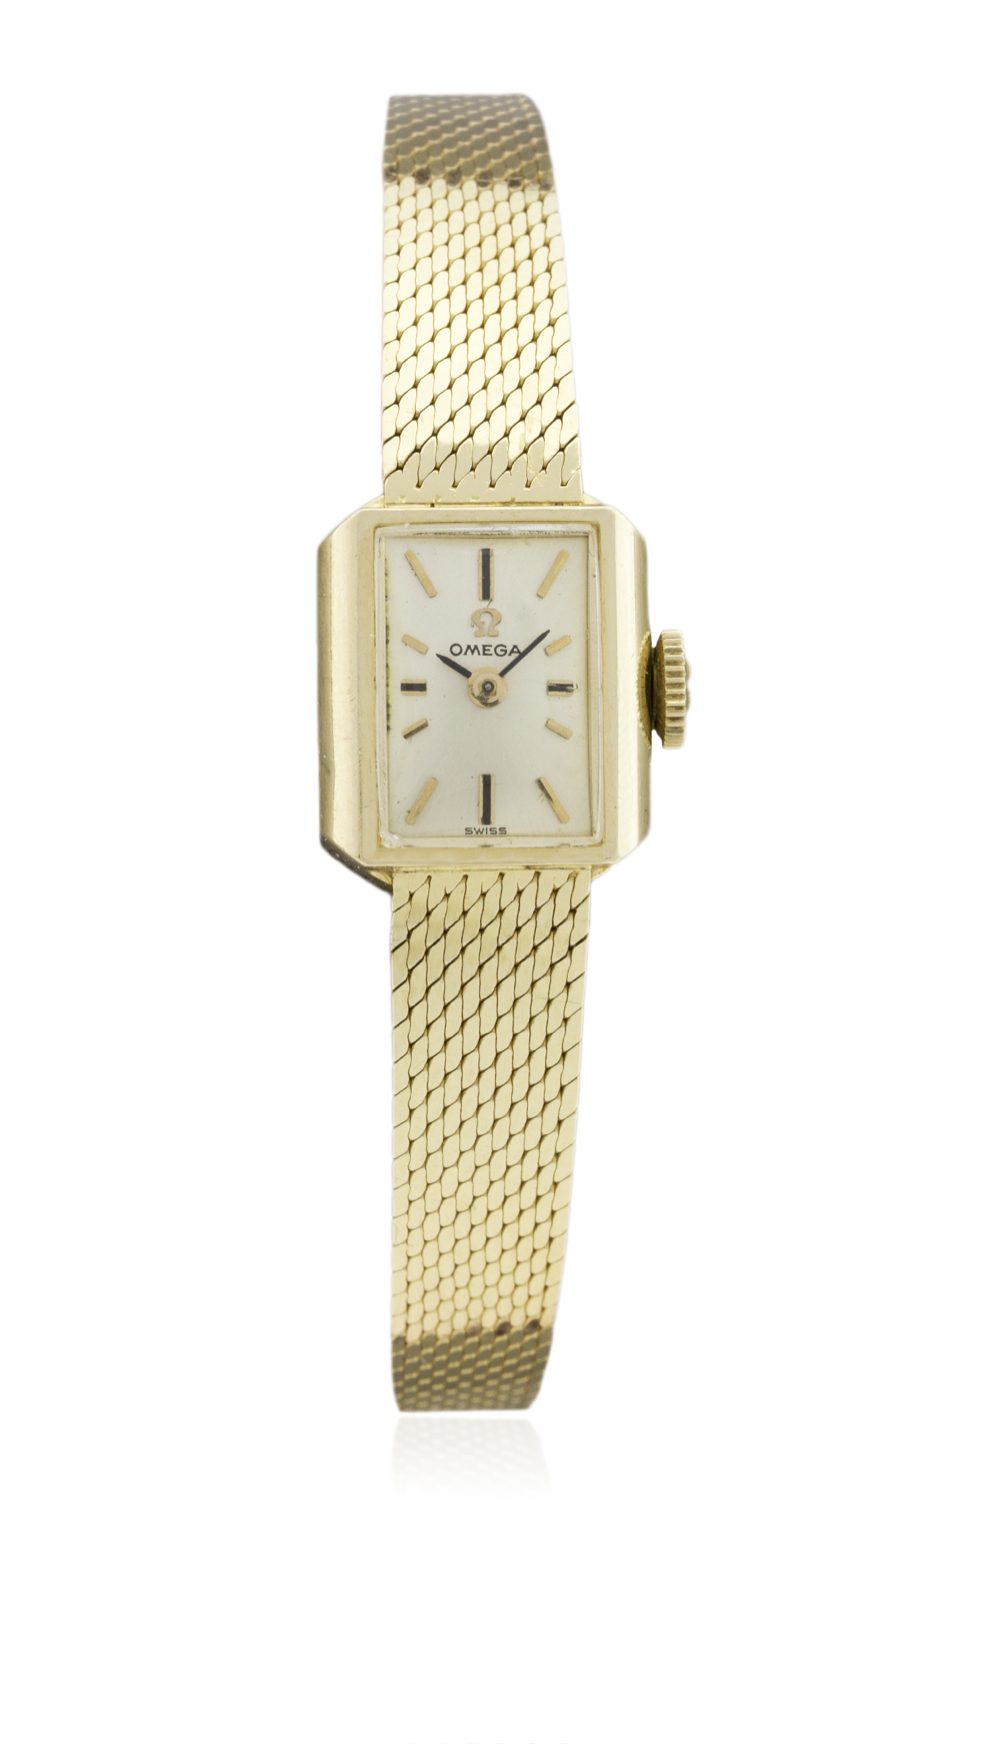 A LADIES 14K SOLID GOLD OMEGA BRACELET WATCH CIRCA 1966 D: Silver dial with gilt batons & black